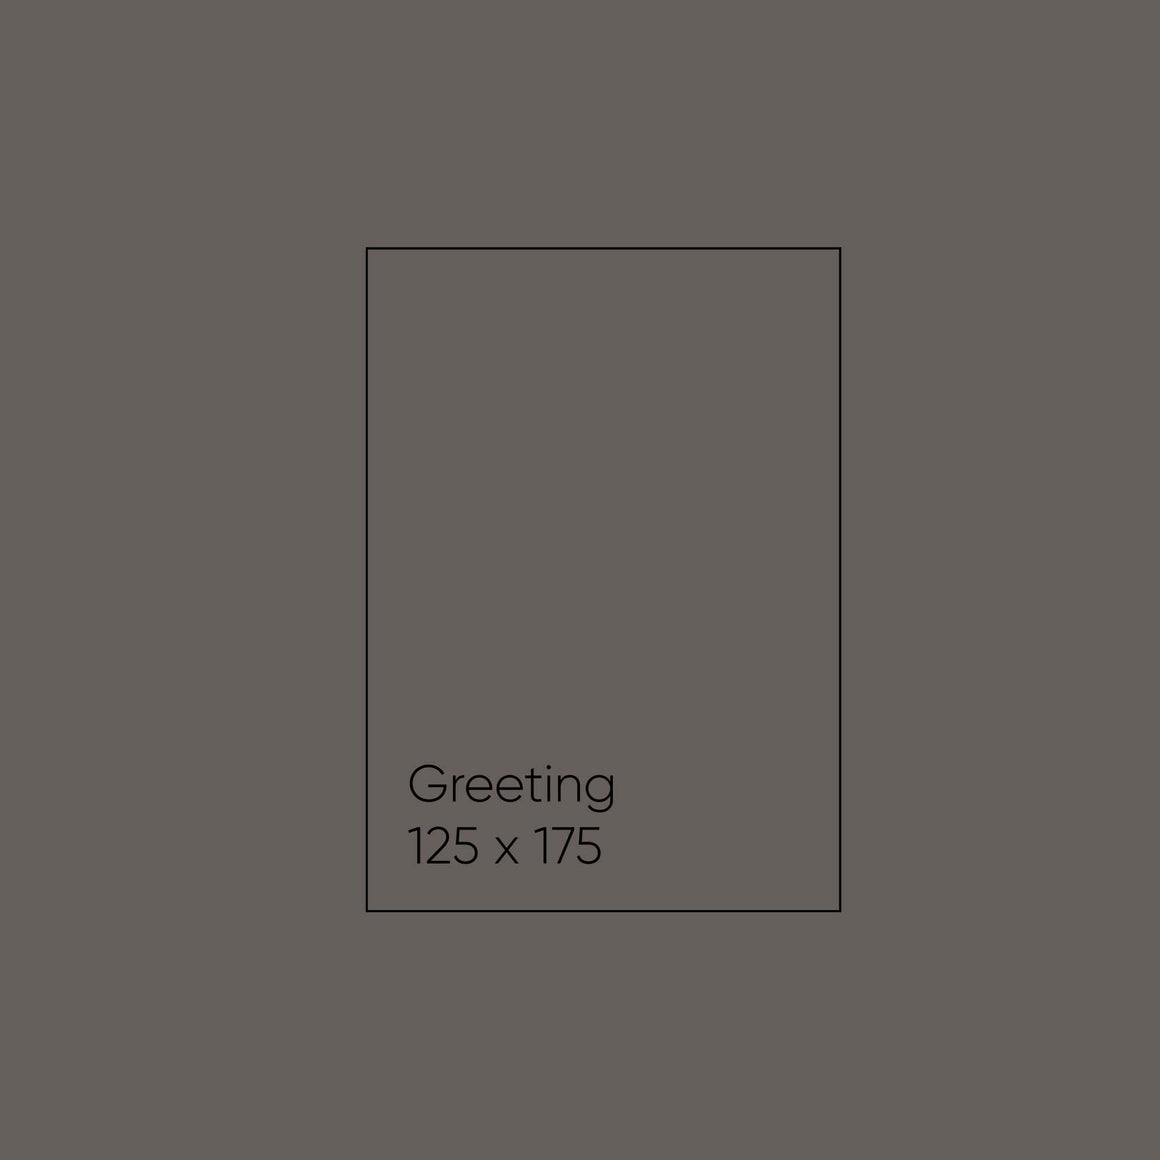 Blank Note Cards - 125 x 175mm, Flat, Environment Concrete, Pack of 15